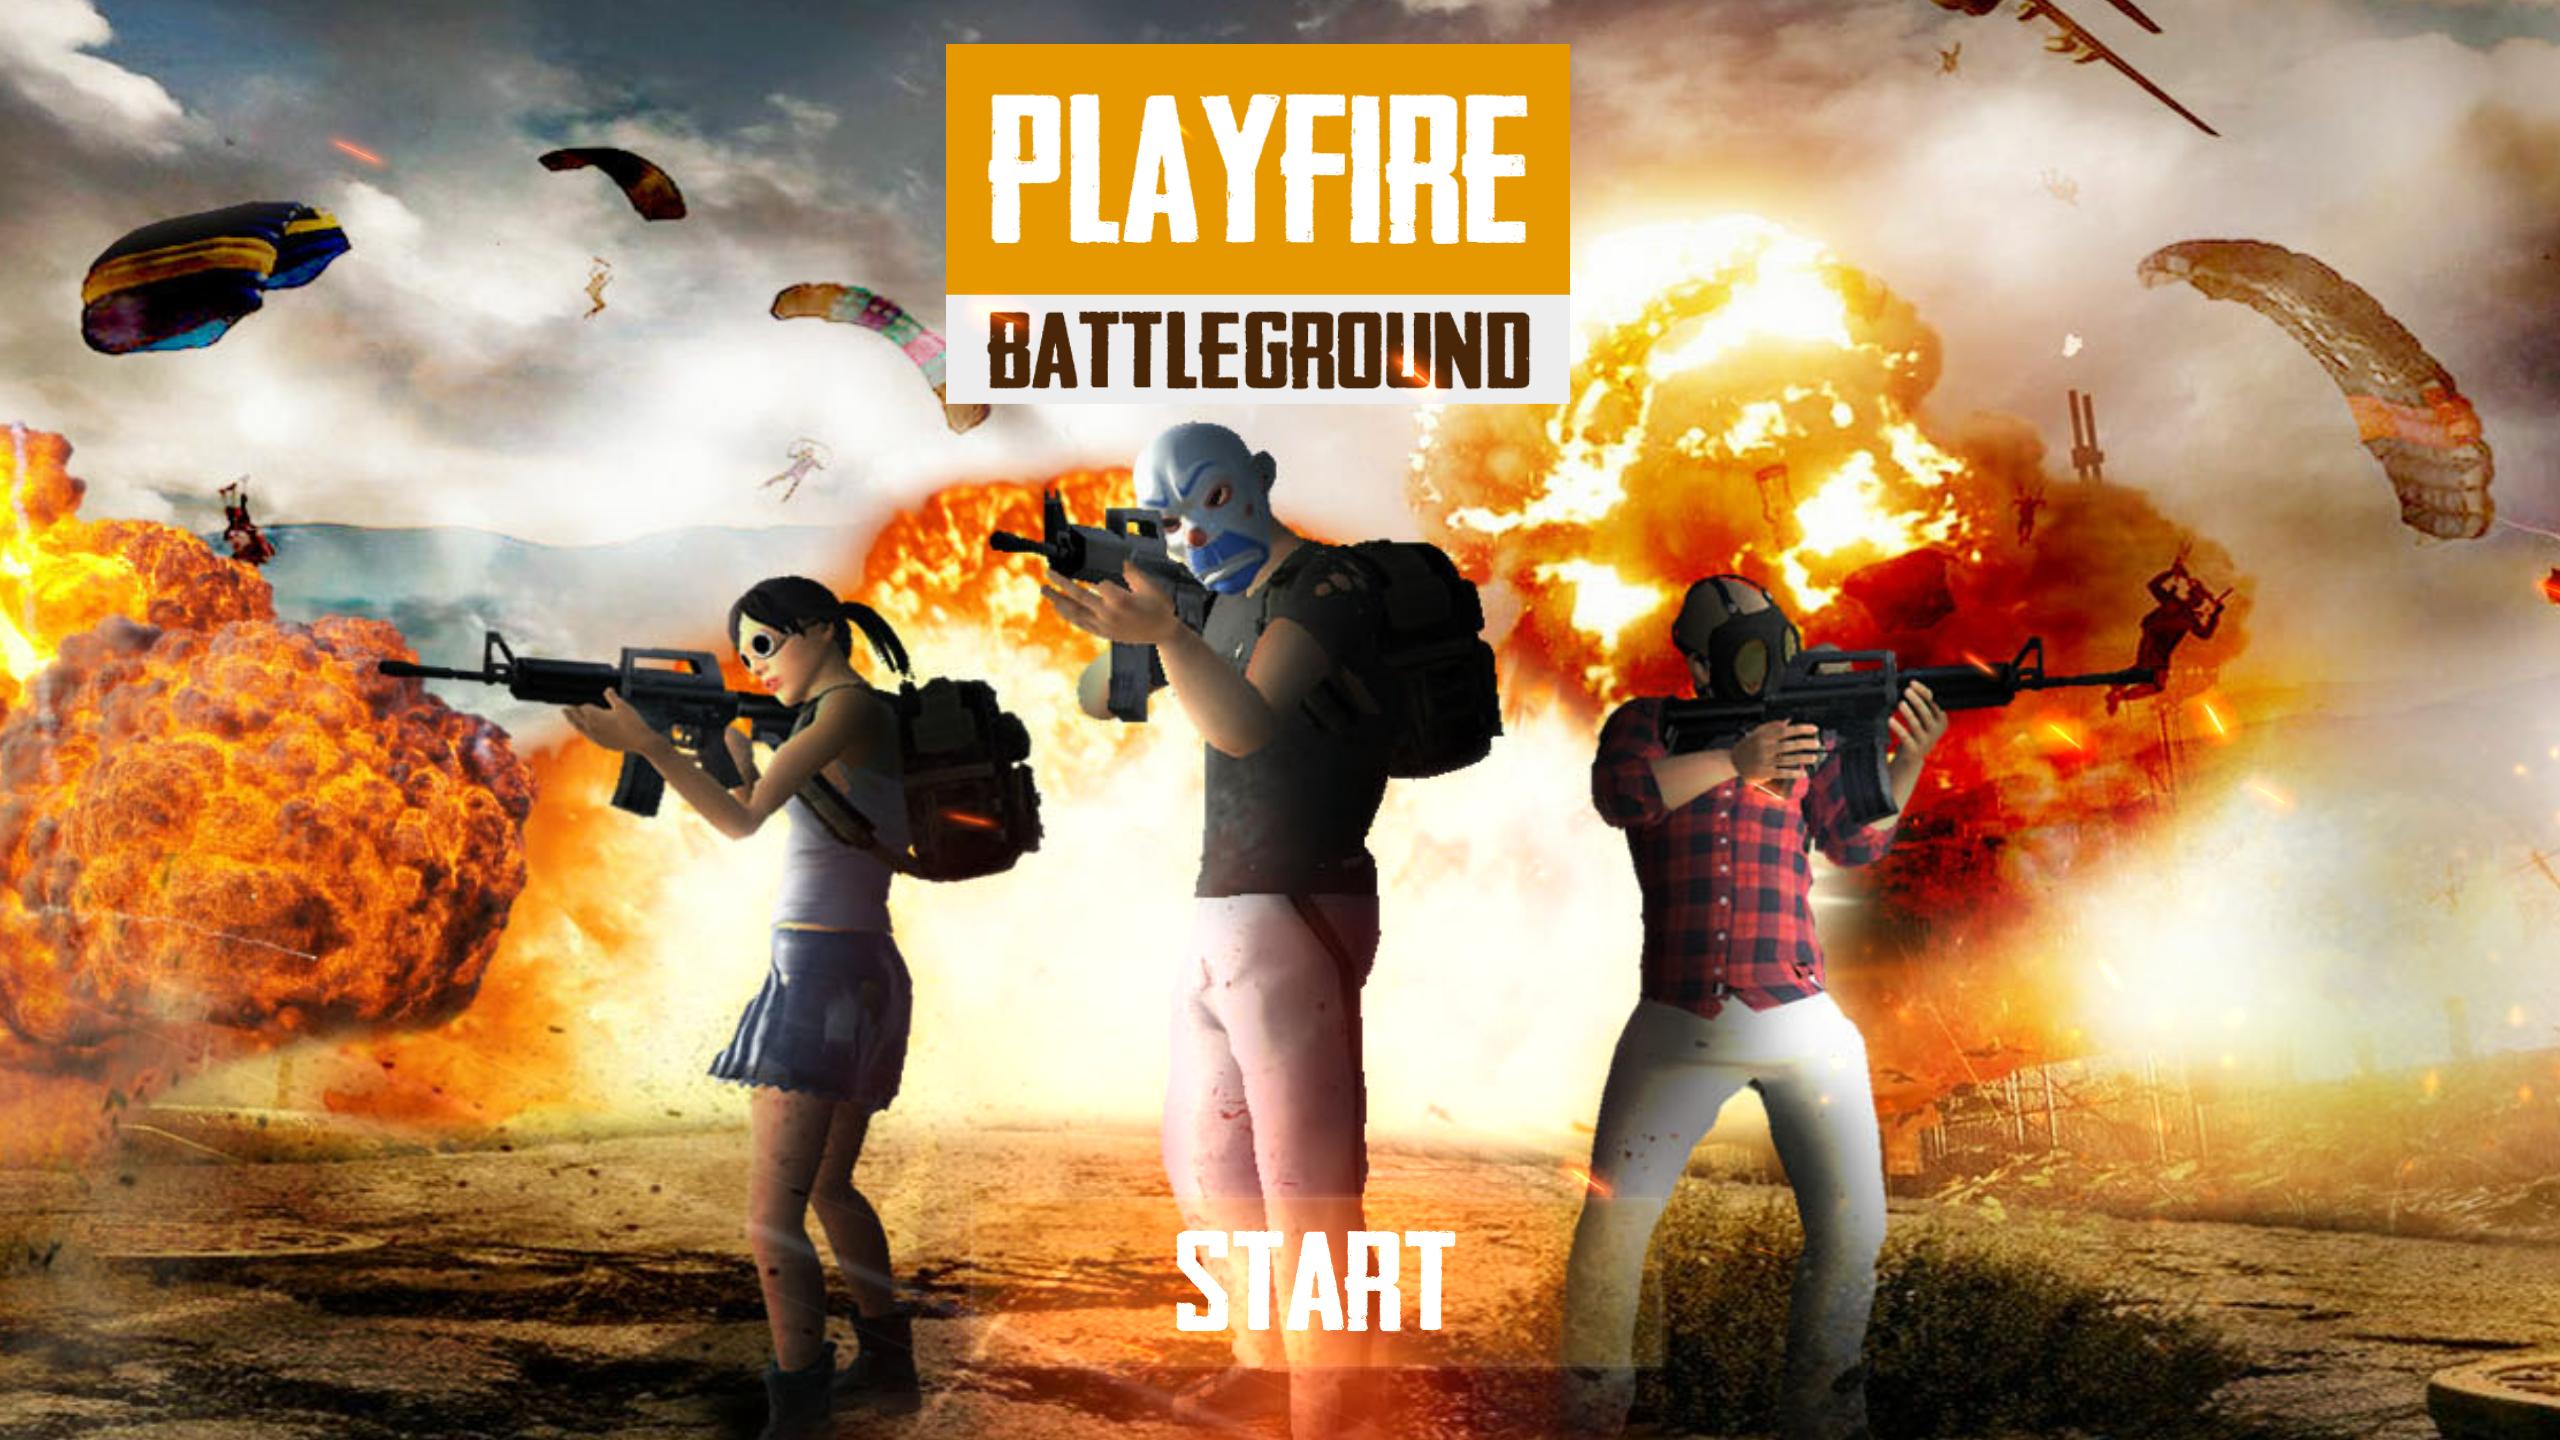 Playing with Fire игра. Плей ИТ фаер. Shooting Play game. Игра fire похожие игры